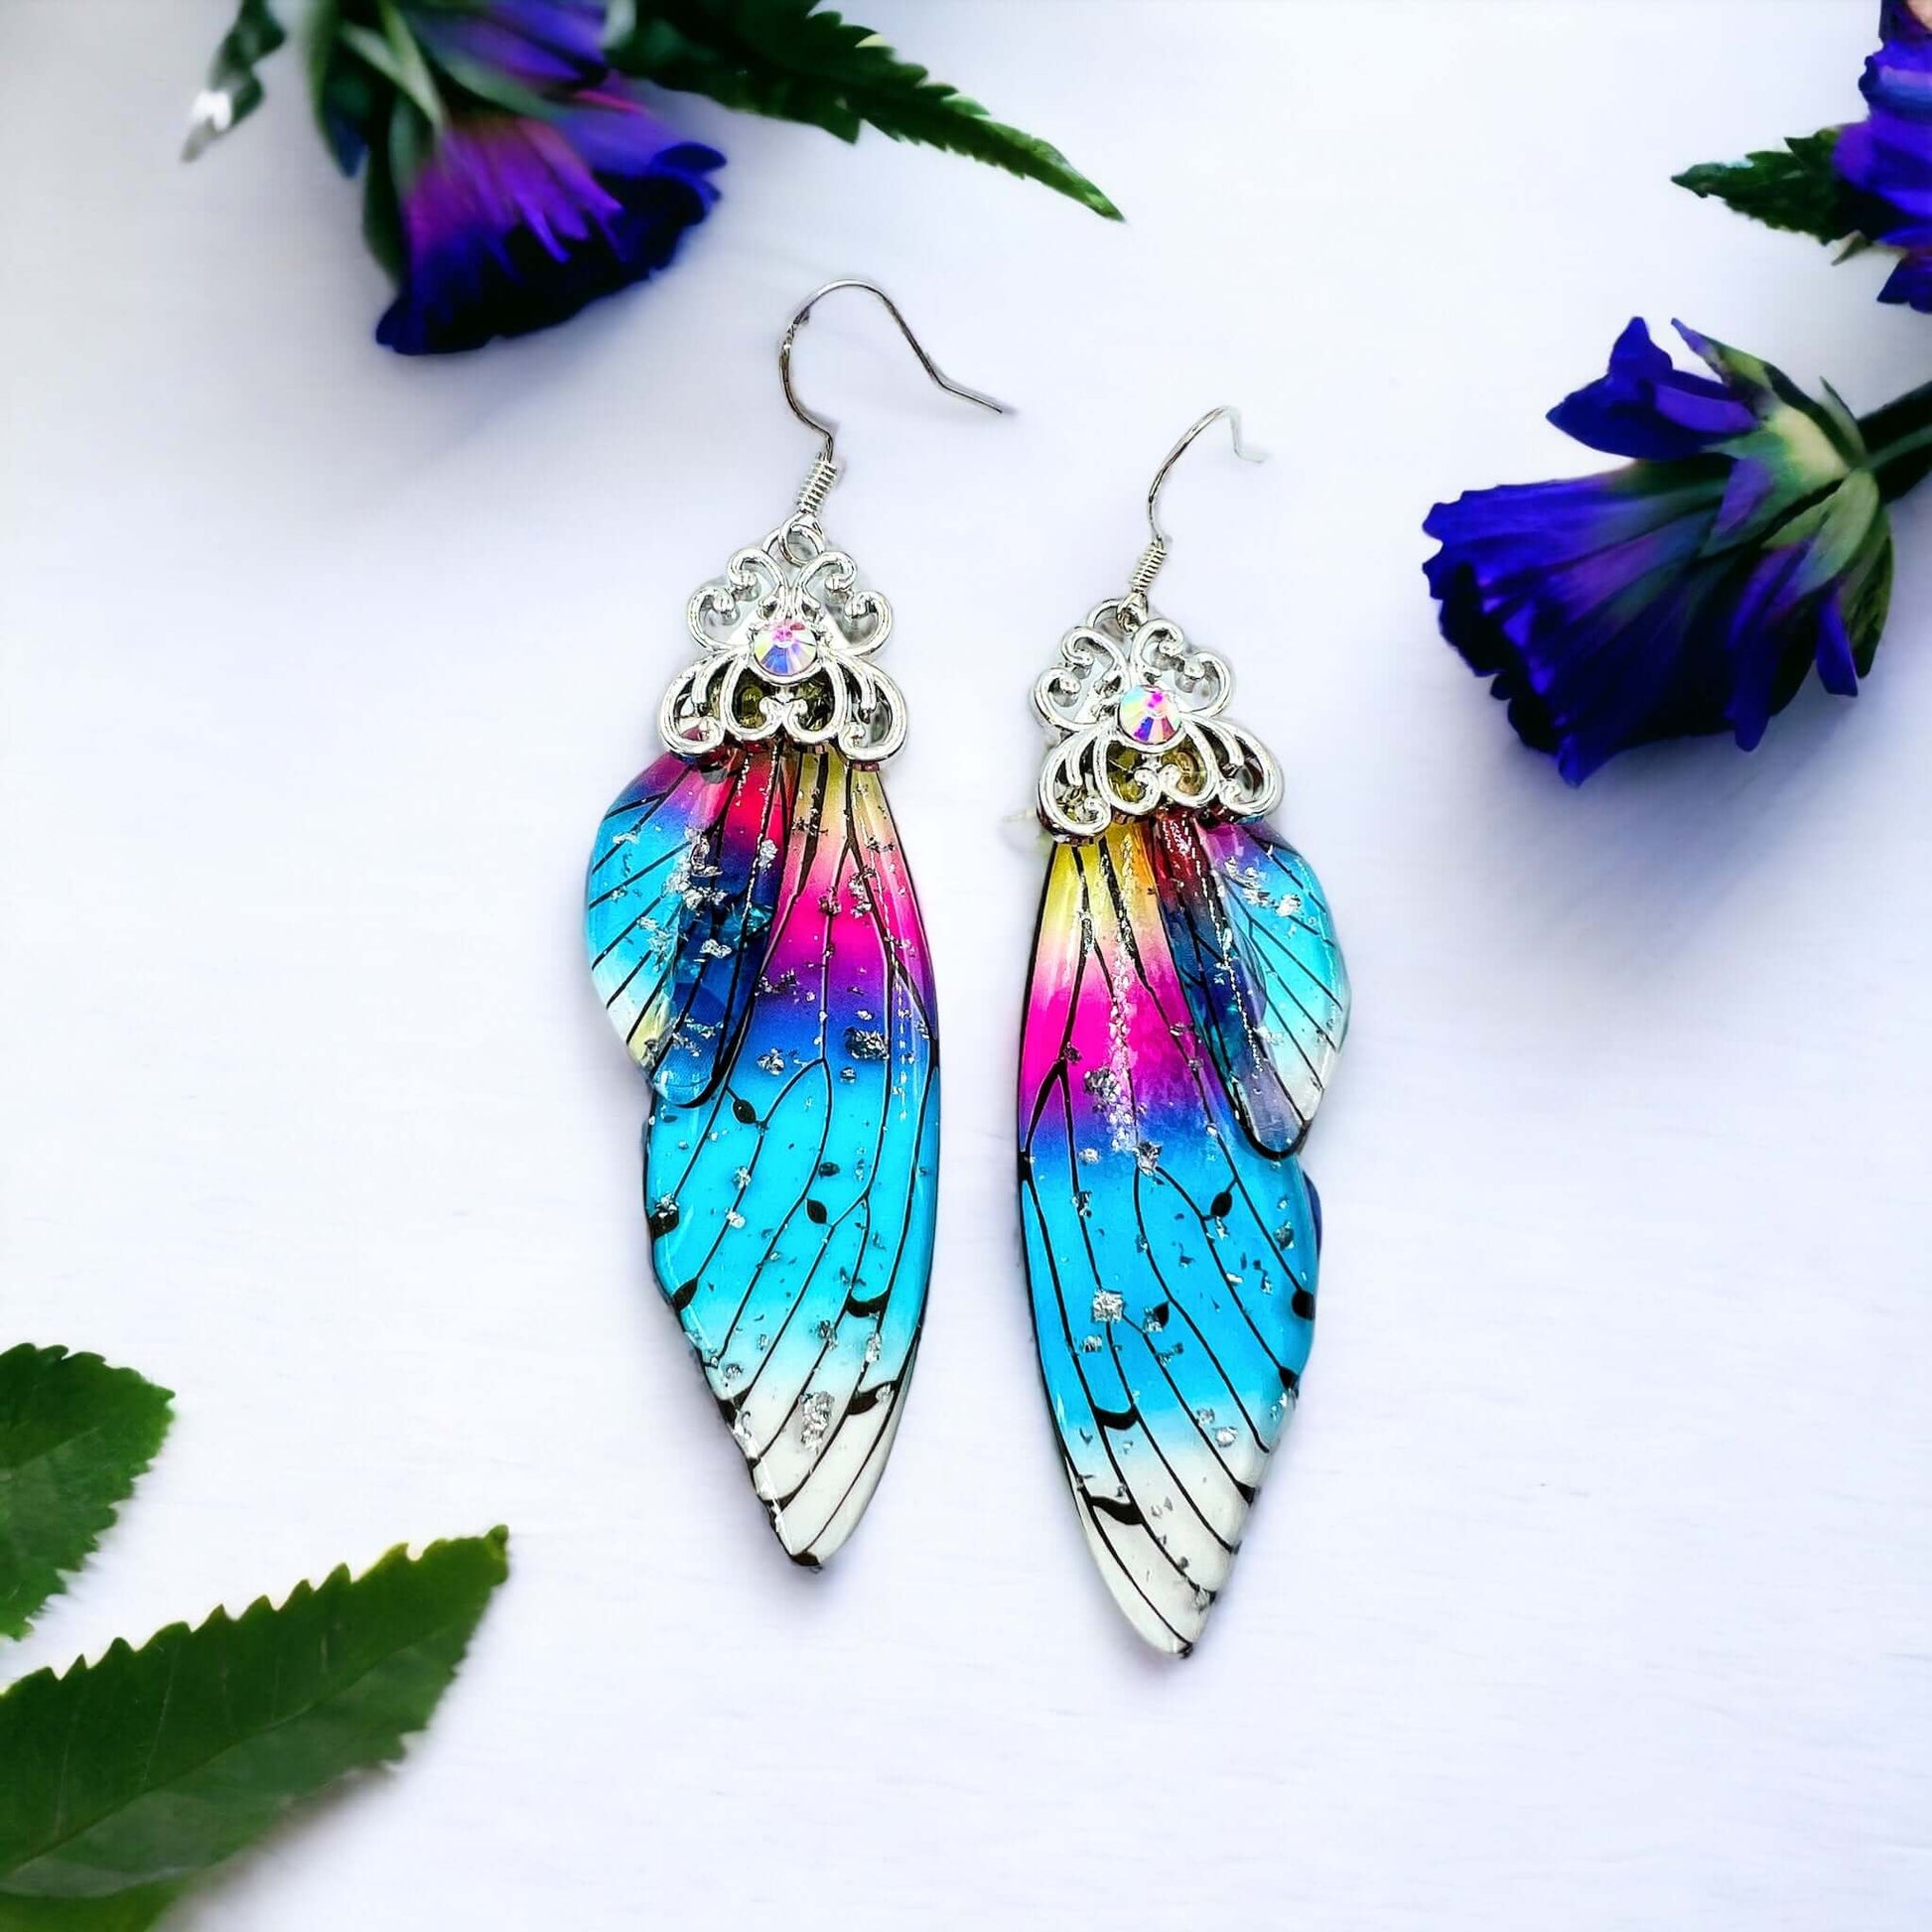 Fairy wing earrings with petals scattered on a white surface.